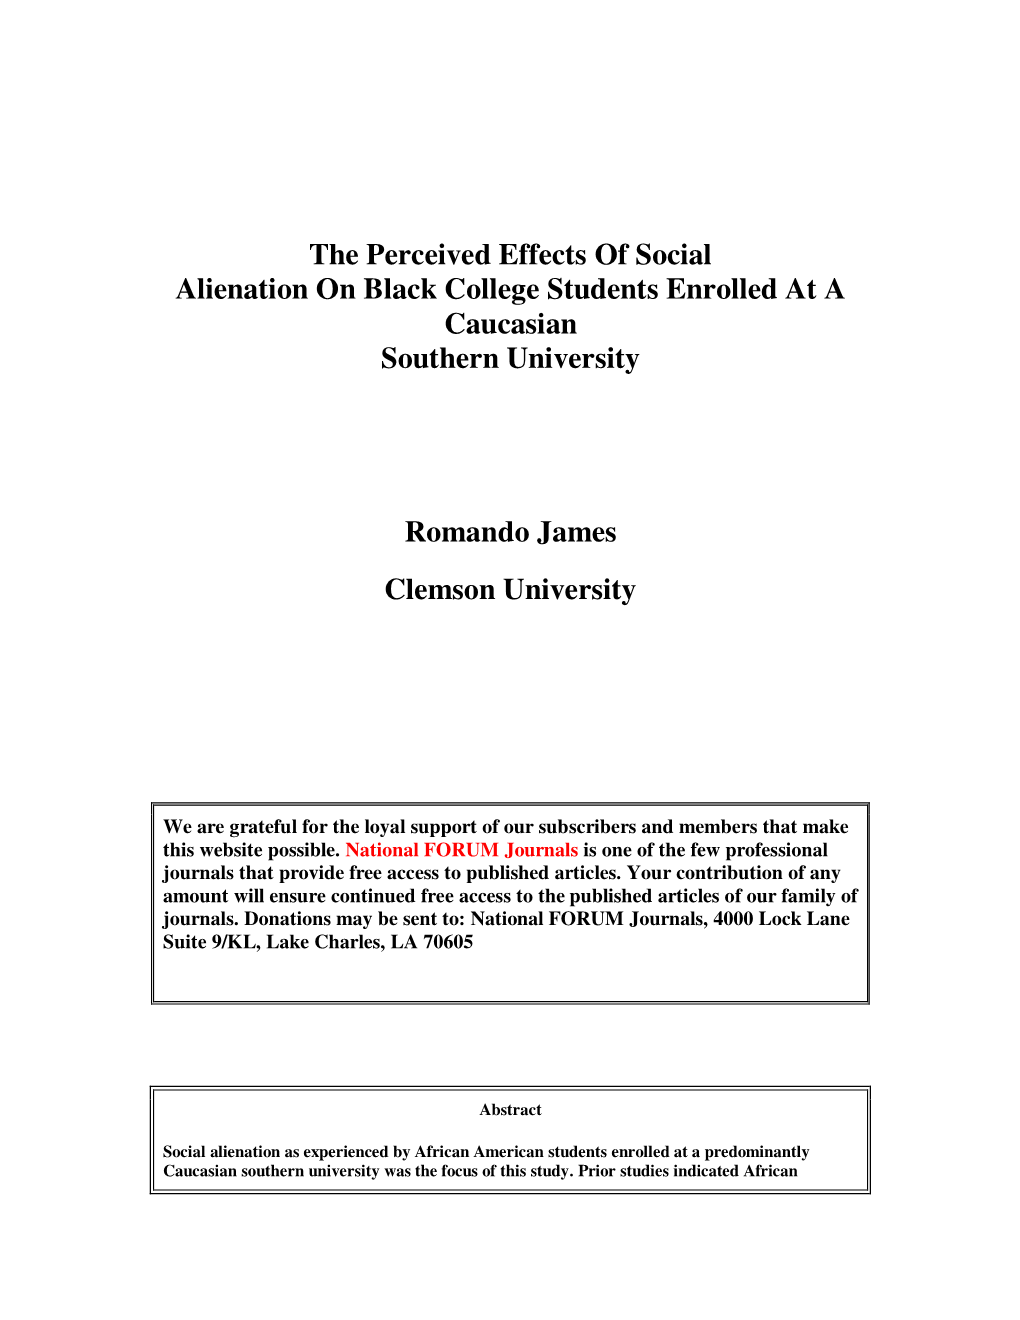 The Perceived Effects of Social Alienation on Black College Students Enrolled at a Caucasian Southern University